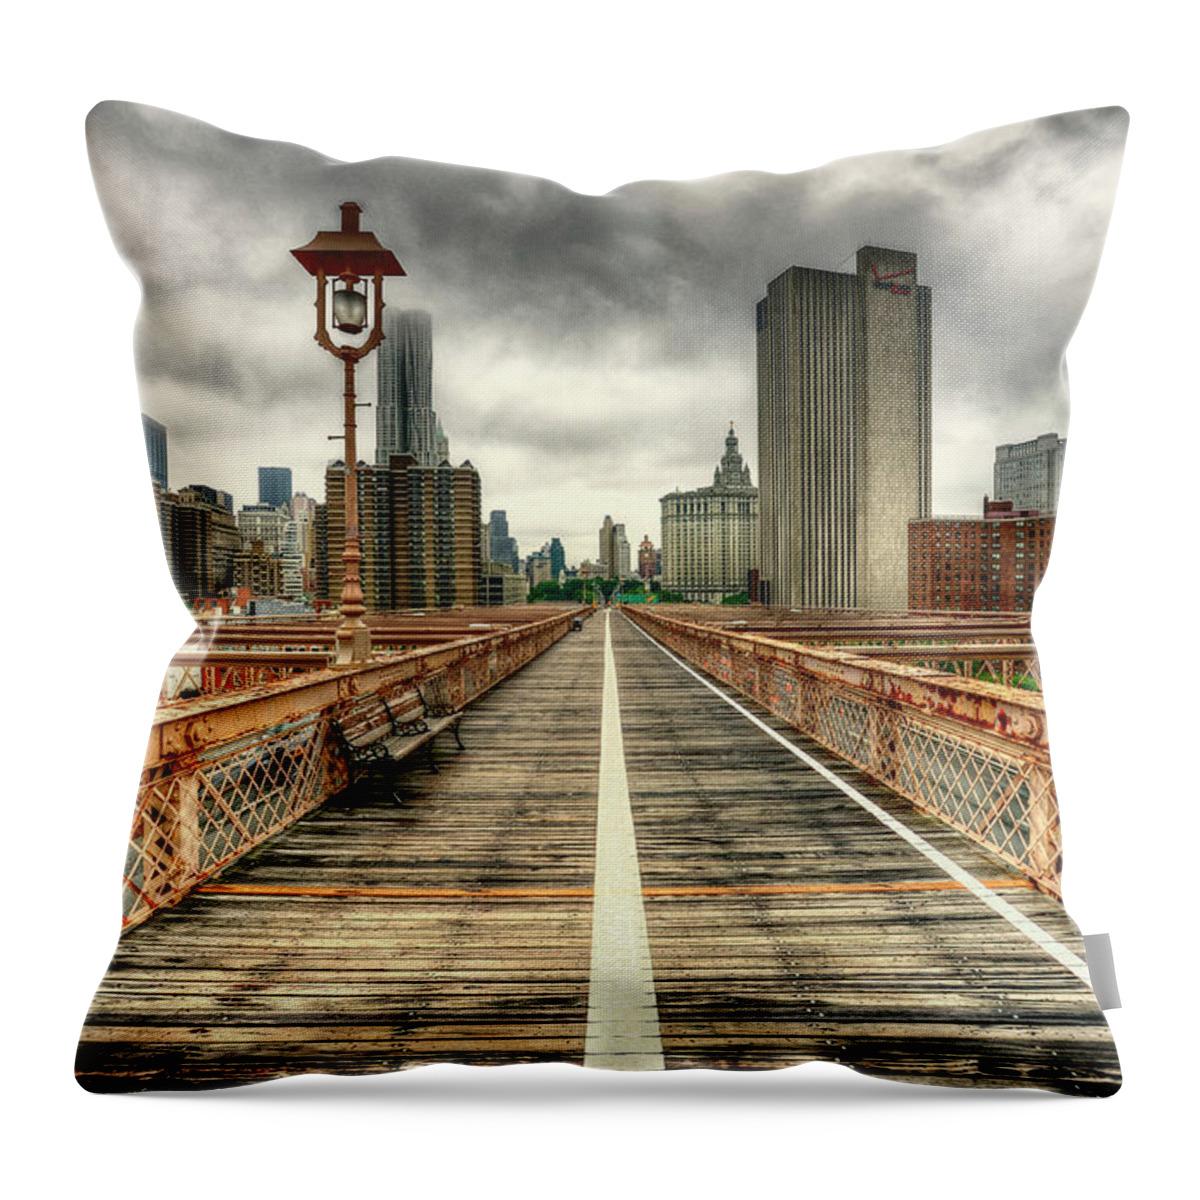 Suspension Bridge Throw Pillow featuring the photograph Cloudy New York From Brooklyn Bridge by Ixefra